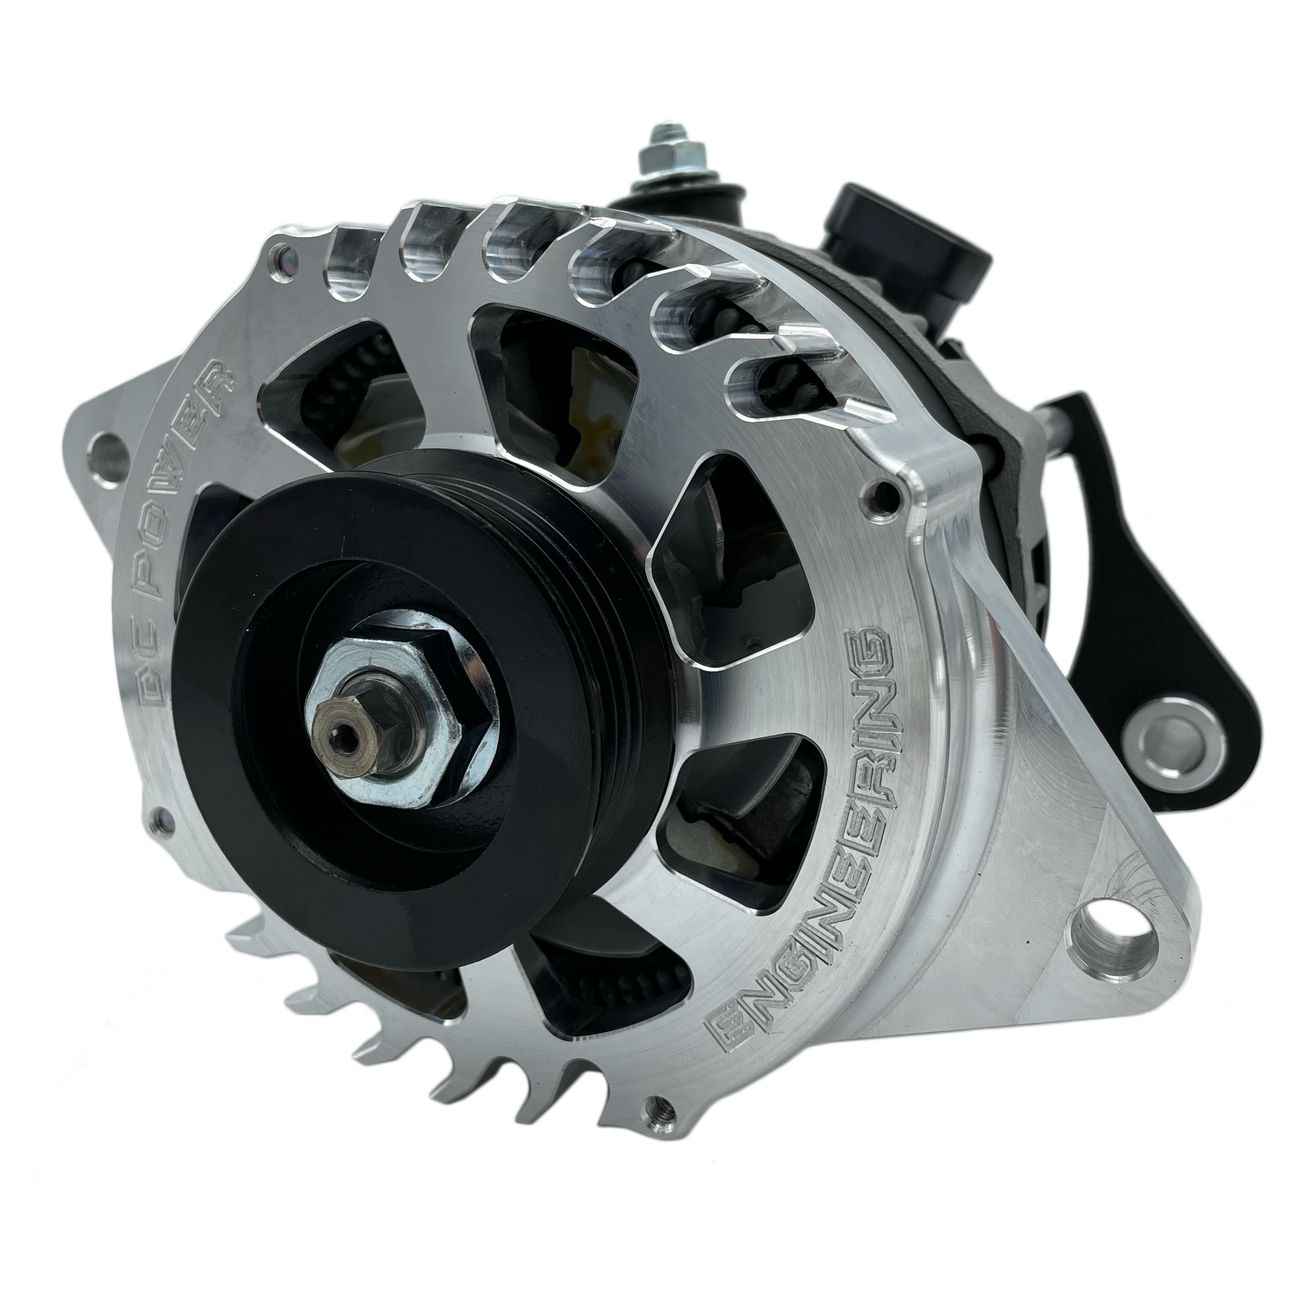 DC Power Engineering 180 Amp HP High Output Alternator - Nissan 300ZX Non-Turbo